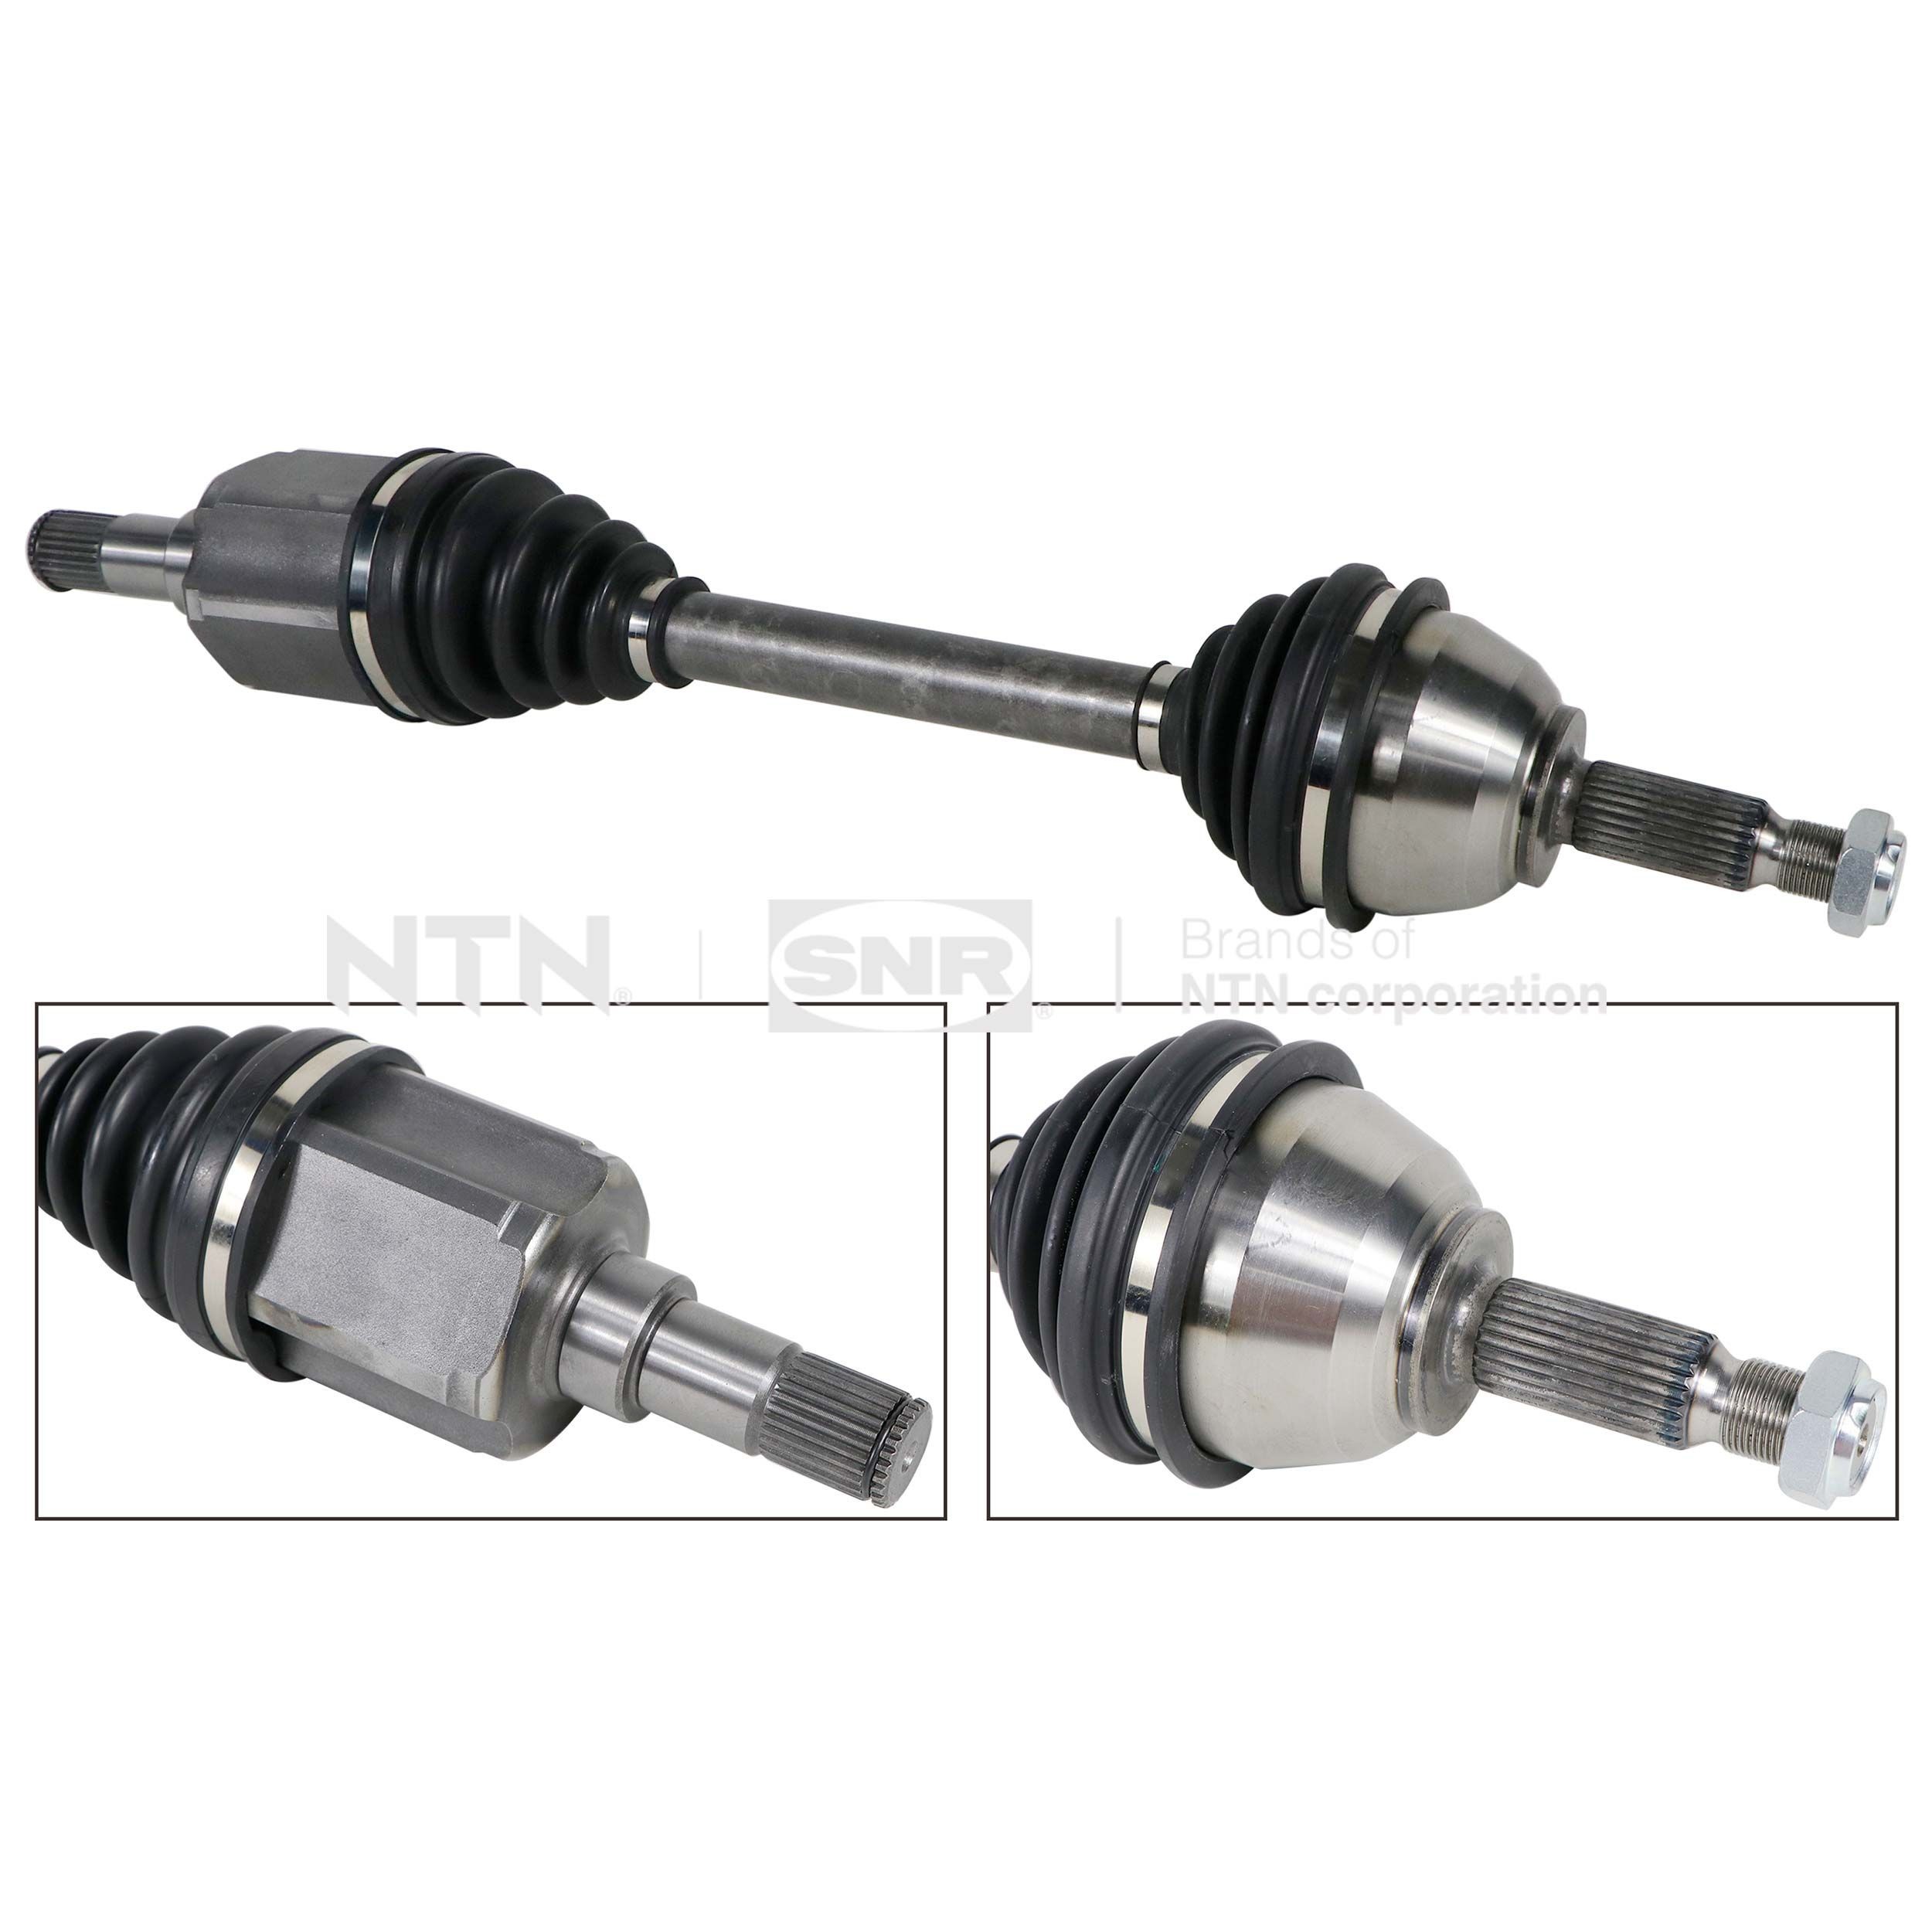 SNR Front Axle Left, 632mm Length: 632mm, External Toothing wheel side: 25 Driveshaft DK52.015 buy